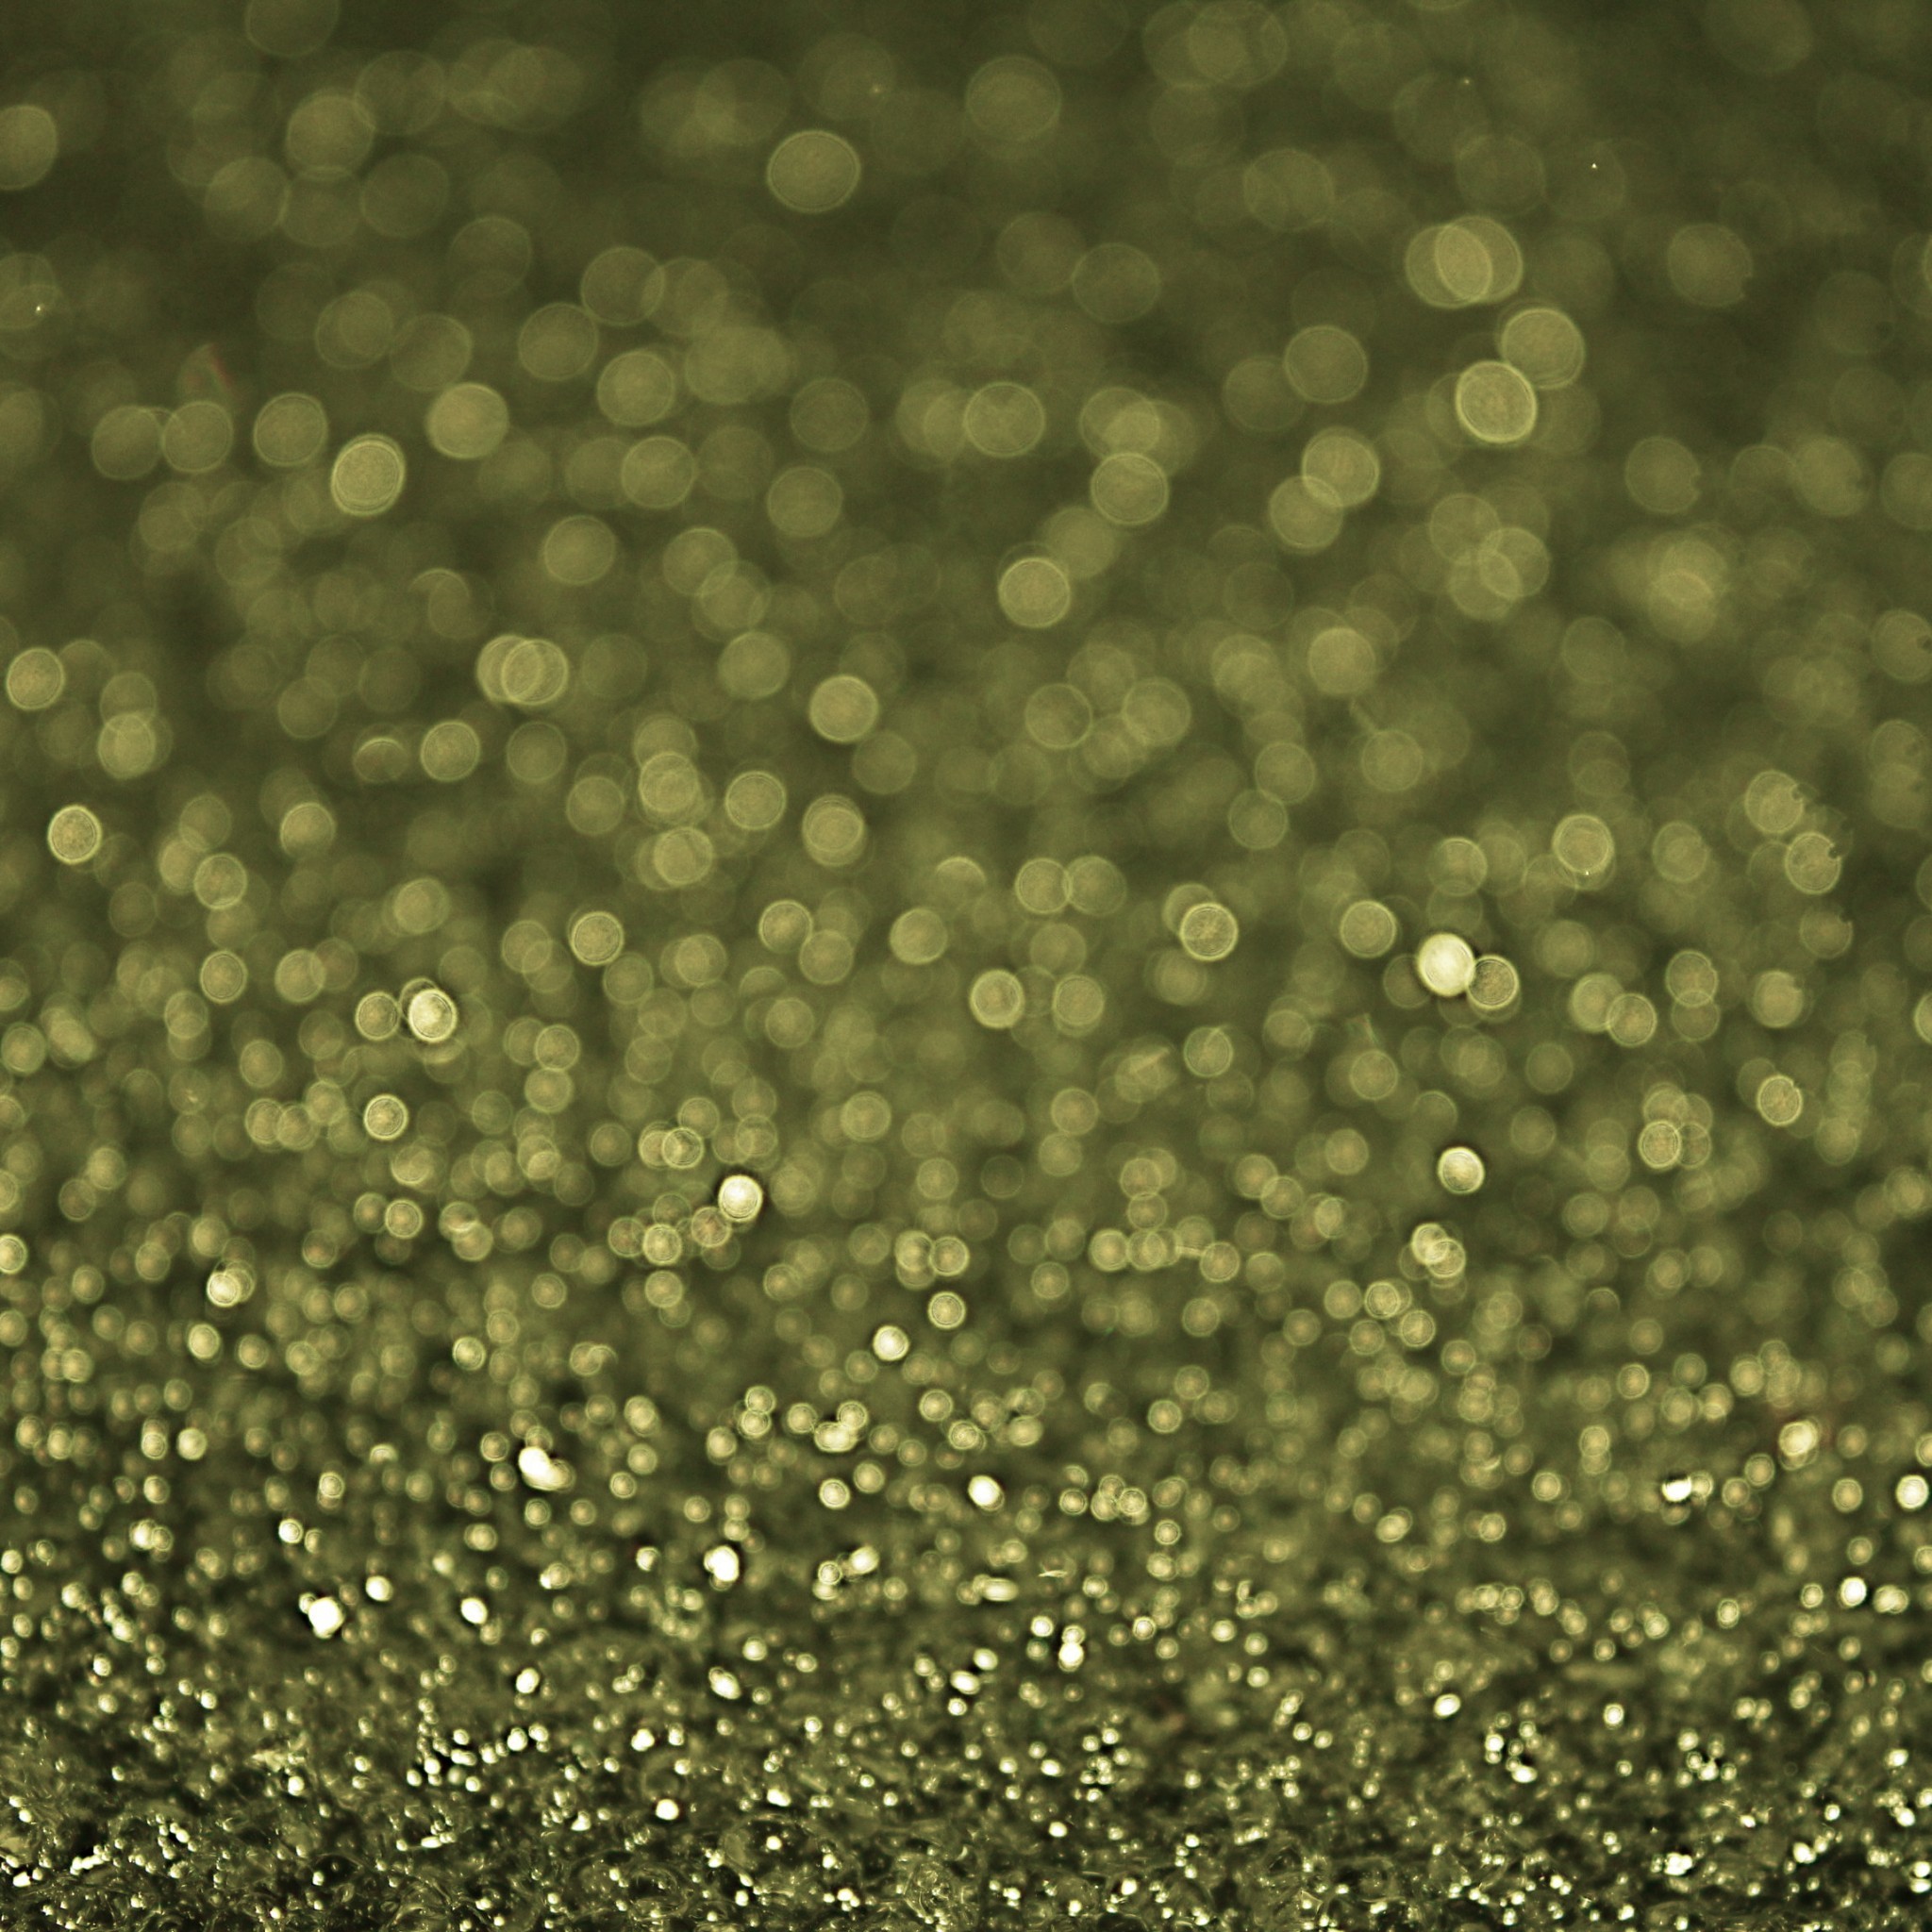 2048x2048 Golden Olive Glitter - Tap to see more bedazzling glittery wallpaper!